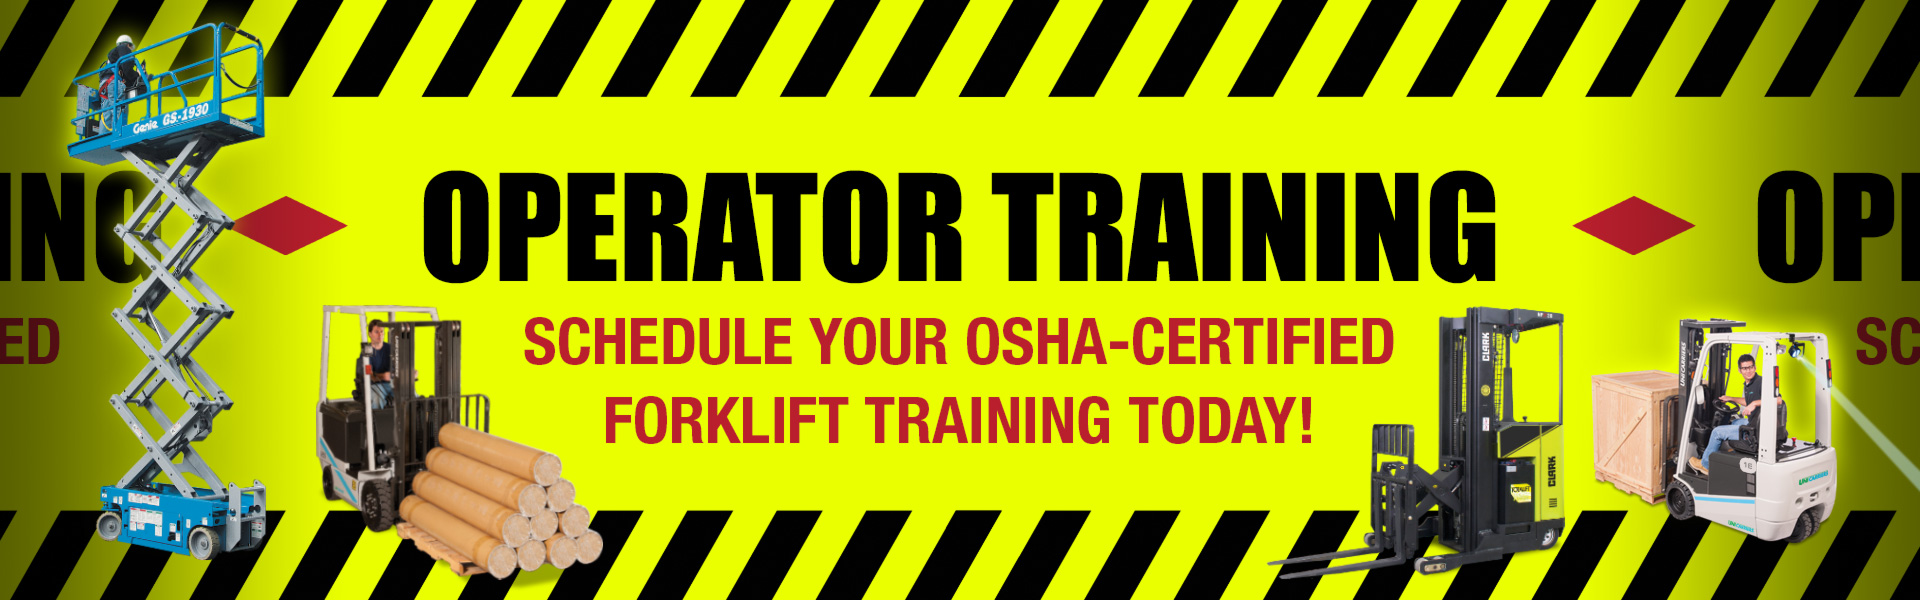 Operator Safety Training - Schedule your OSHA-certified forklift operator training today.